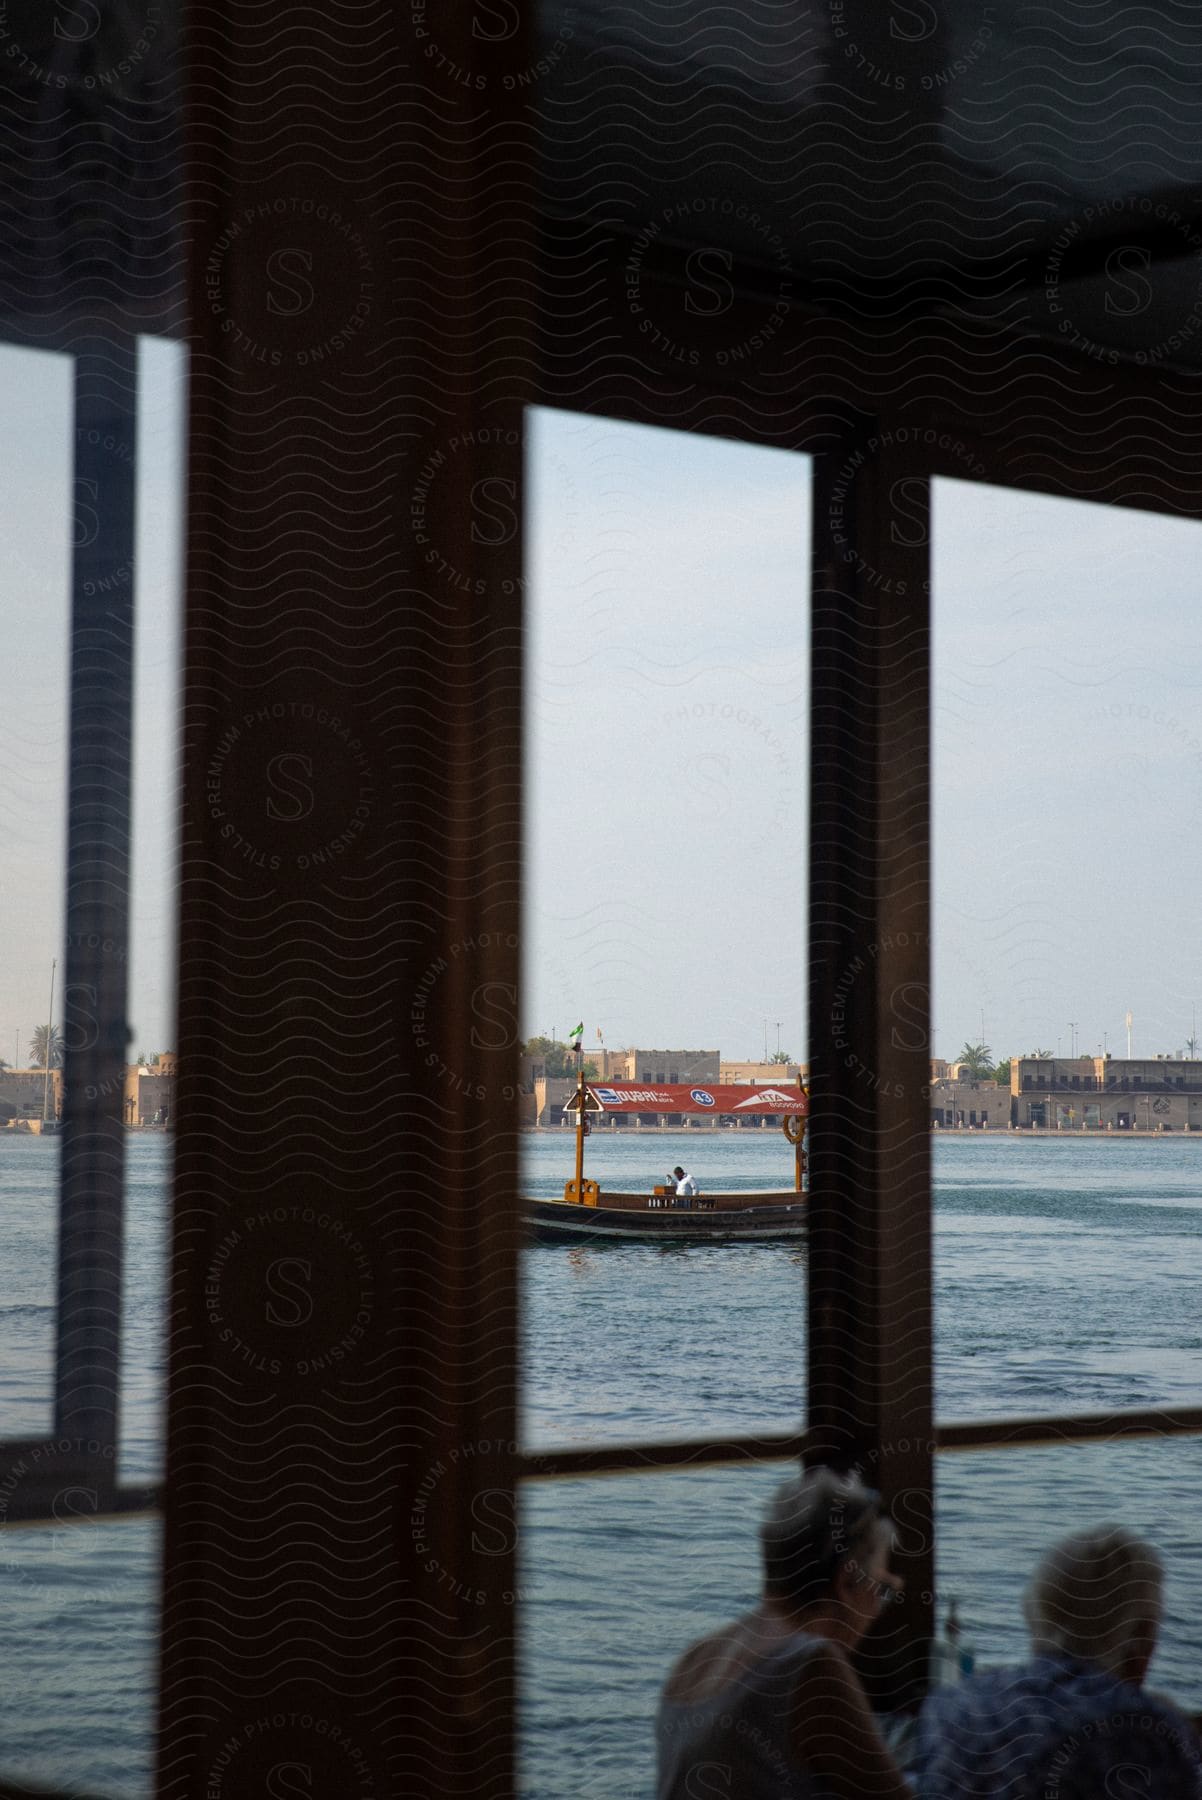 A view of the outside through a wooden-framed window. The main focus is on a yellow boat sailing on the water, visible through the window.